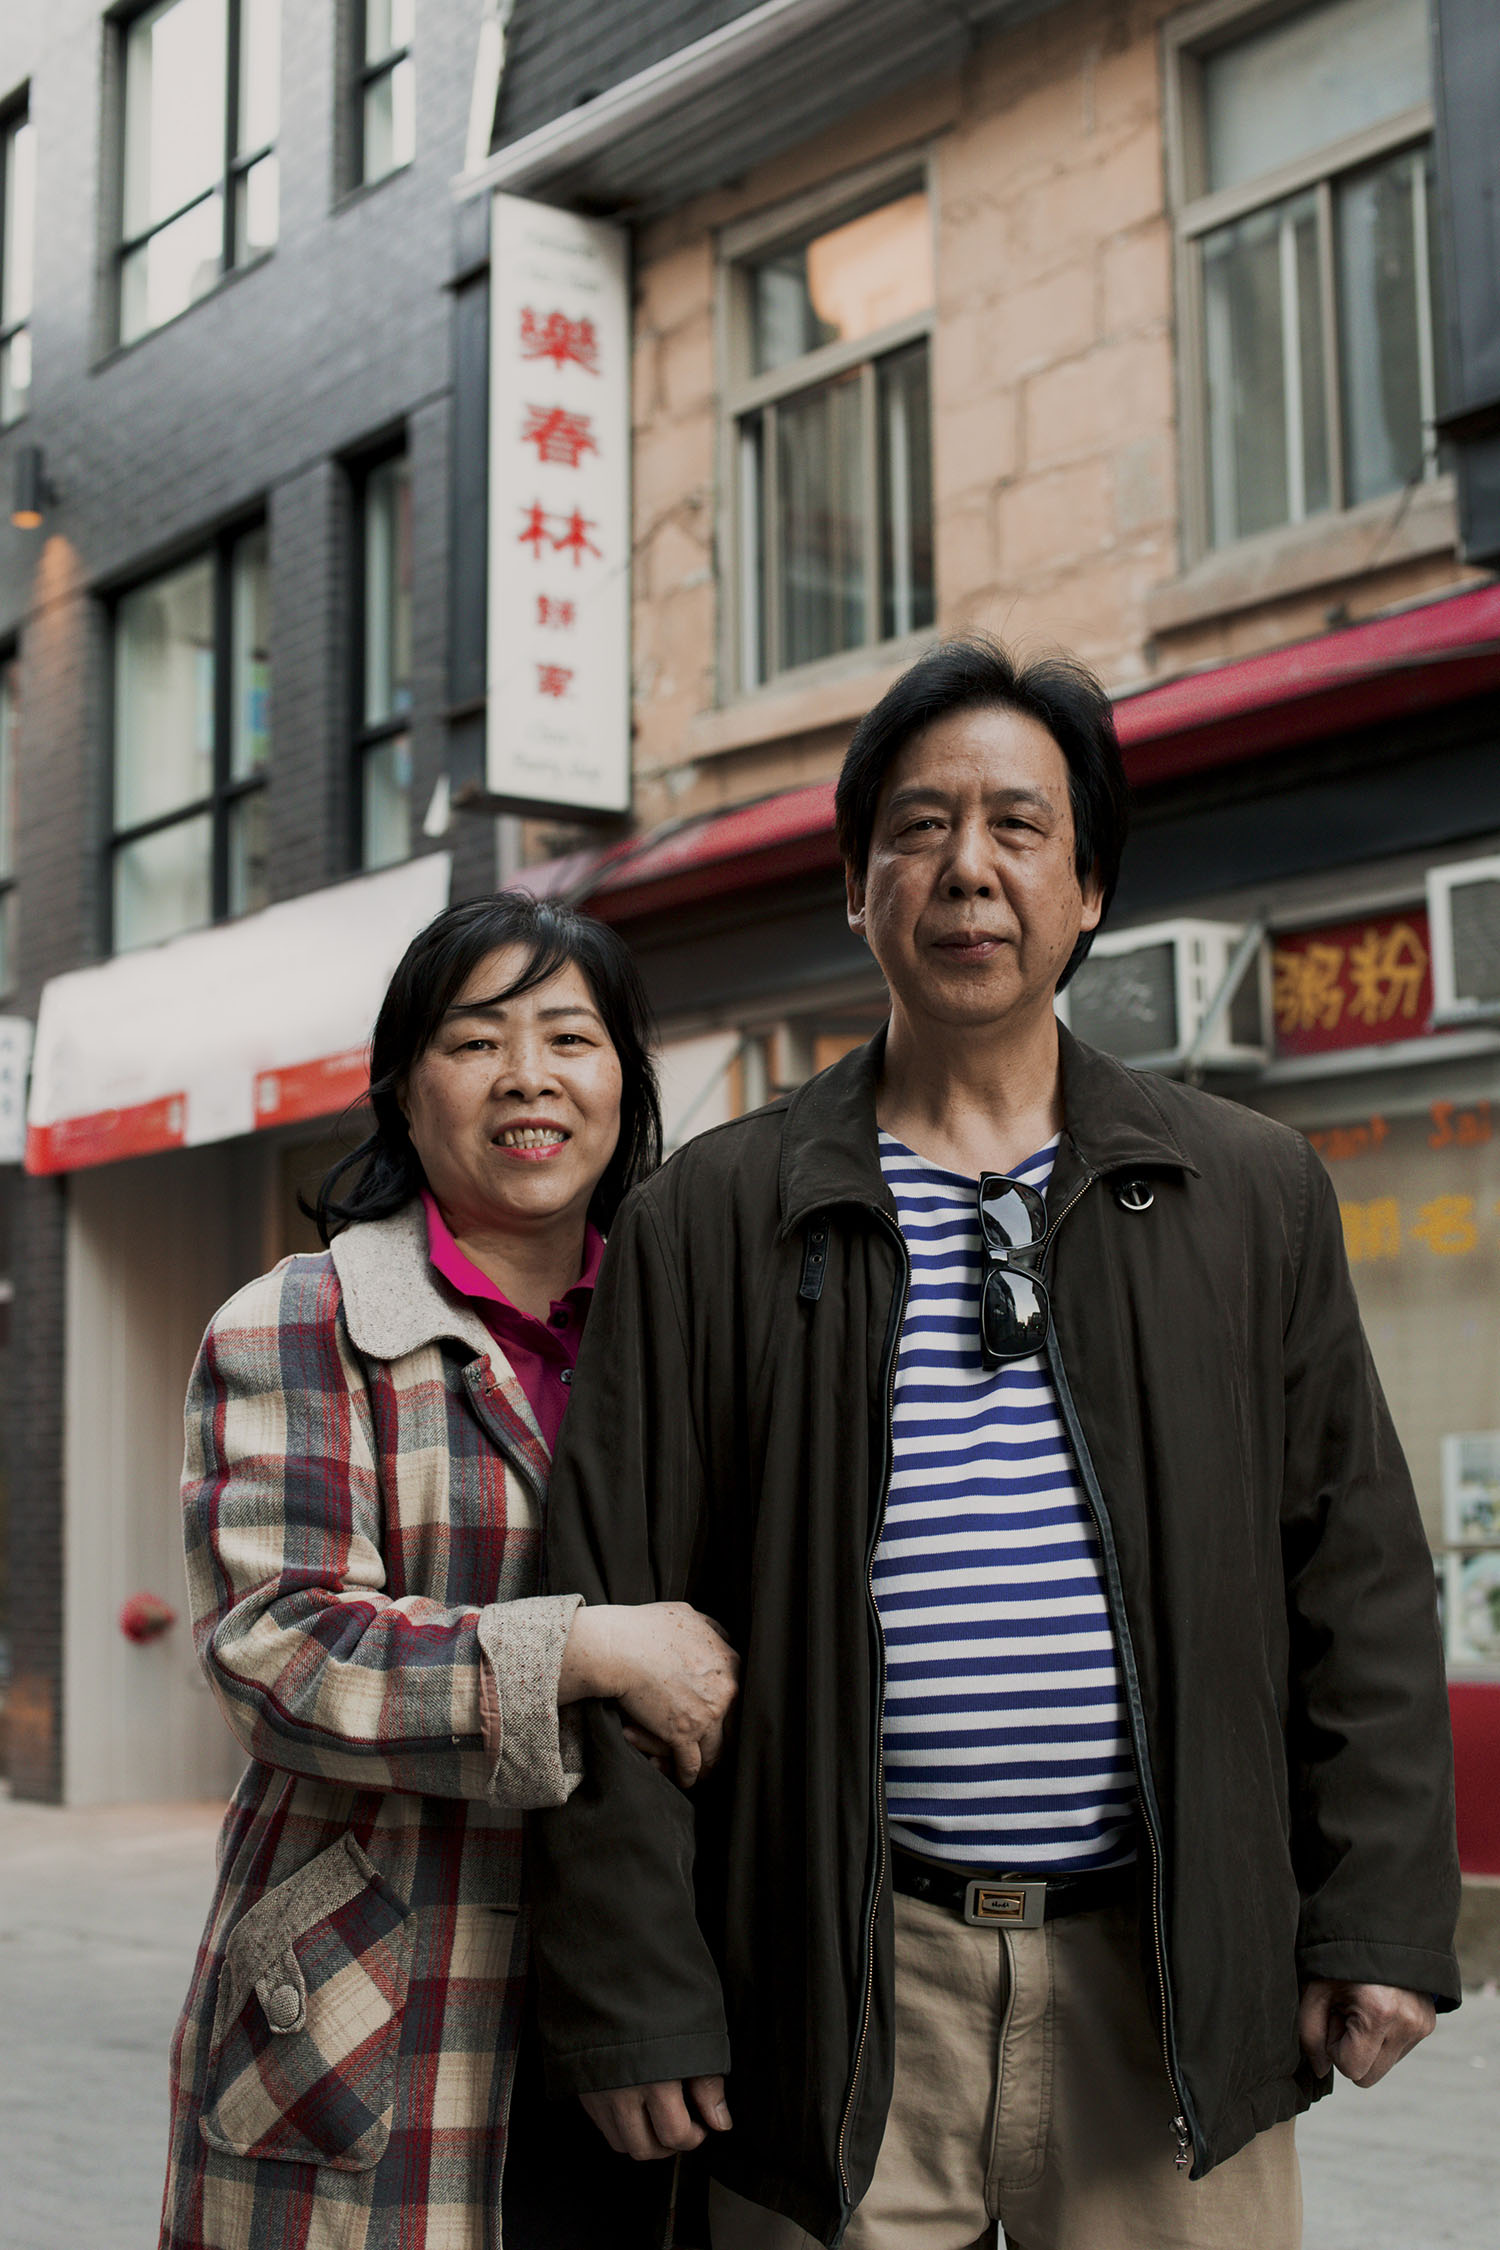 Colour photo of a woman and a man standing next to each other in front of a building in Montréal’s Chinatown.